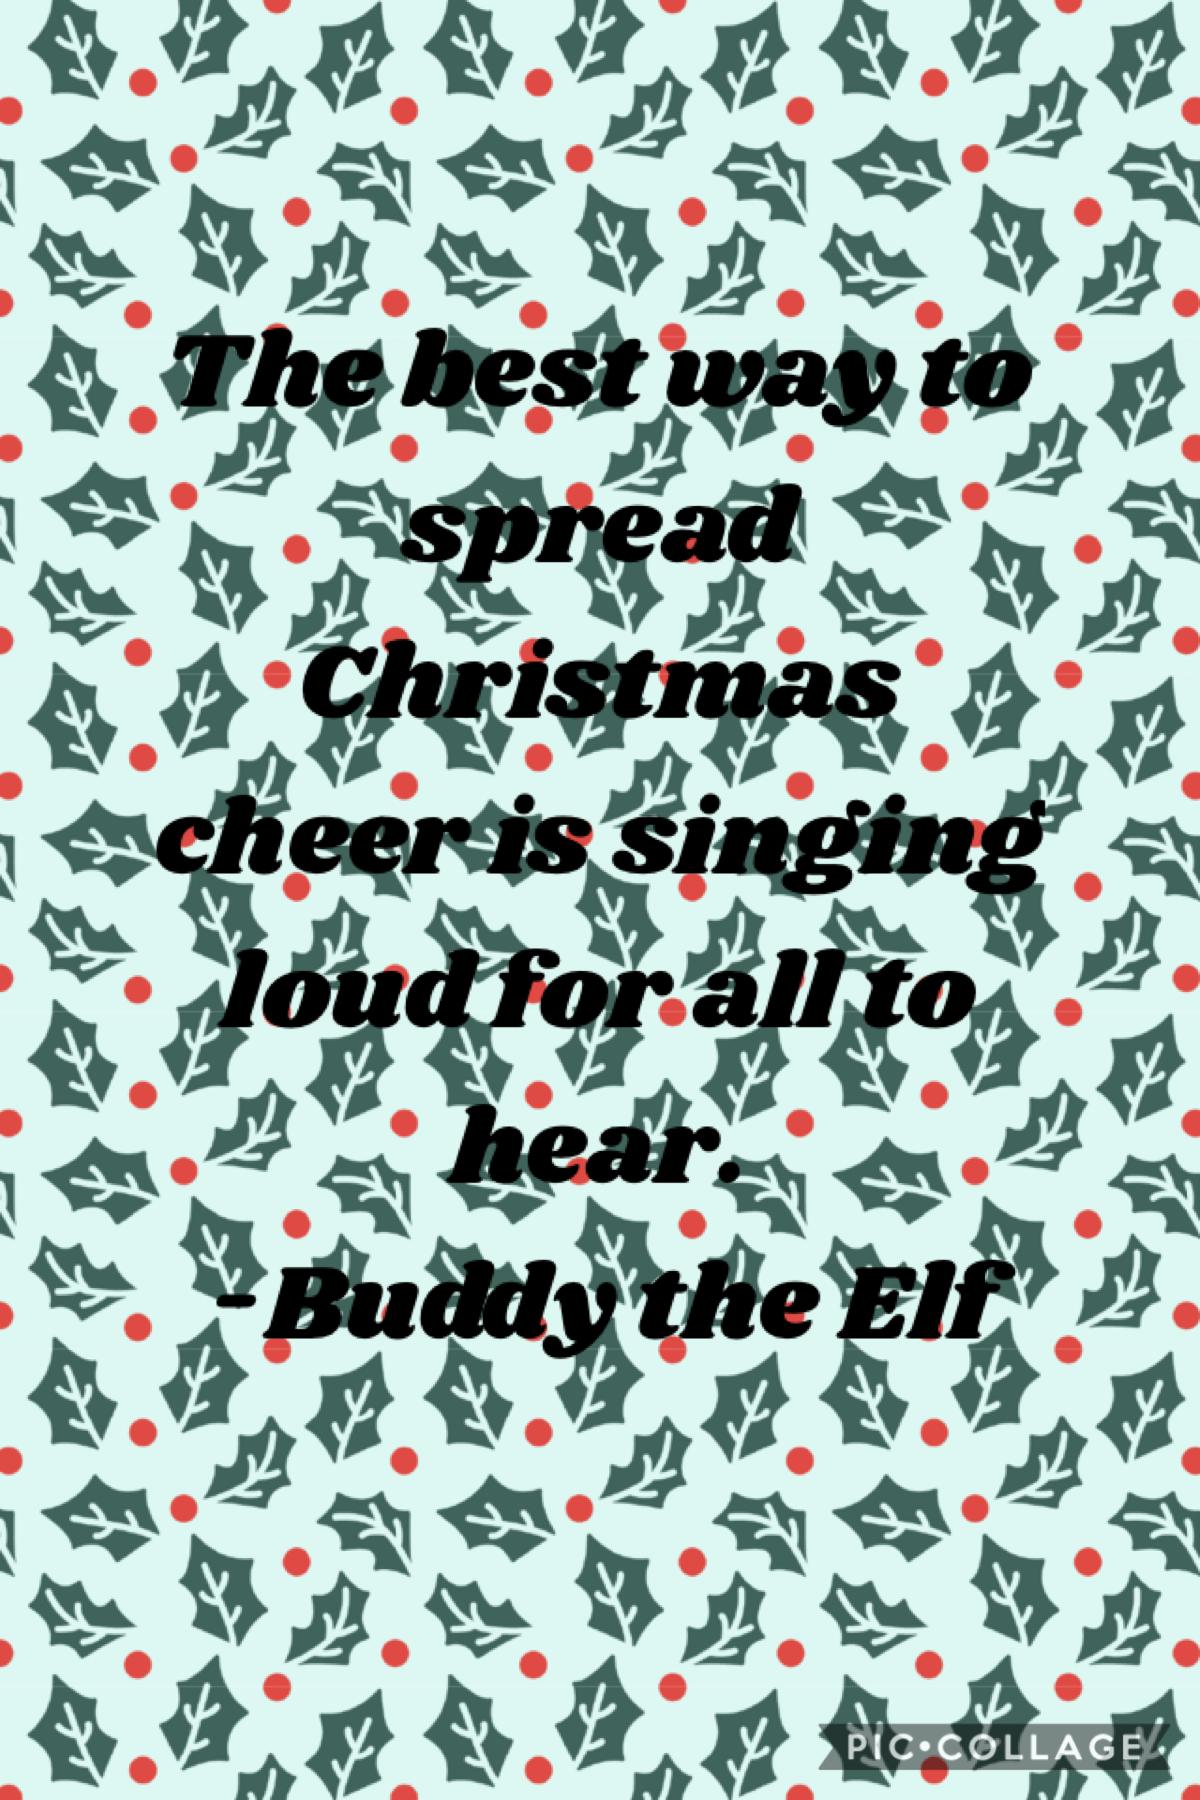 This is  amazing quote by Buddy the Elf